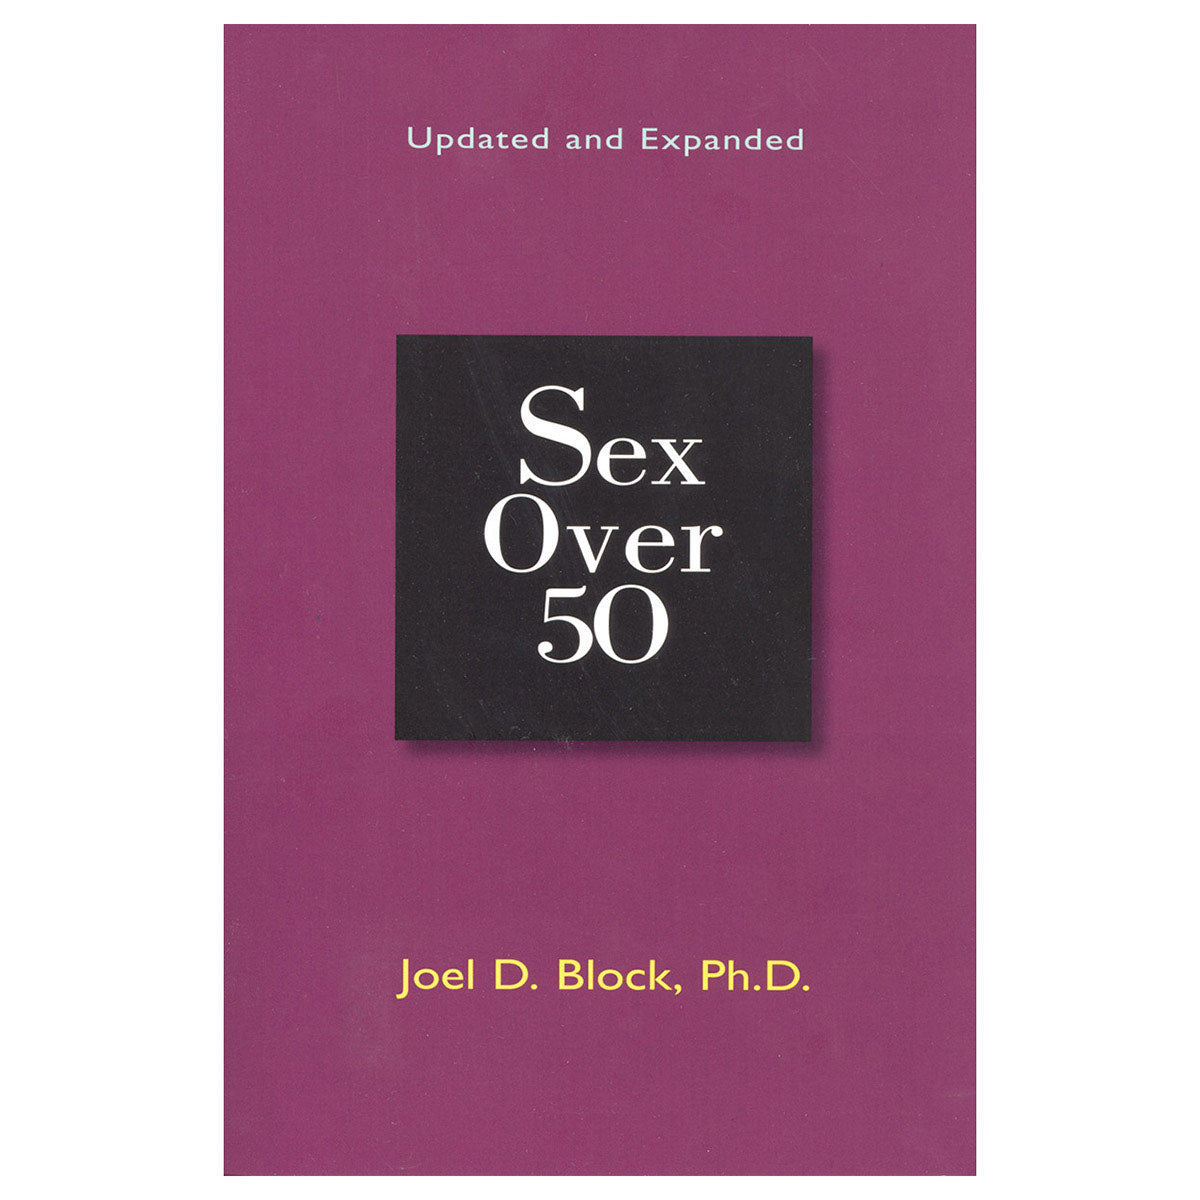 Sex Over 50